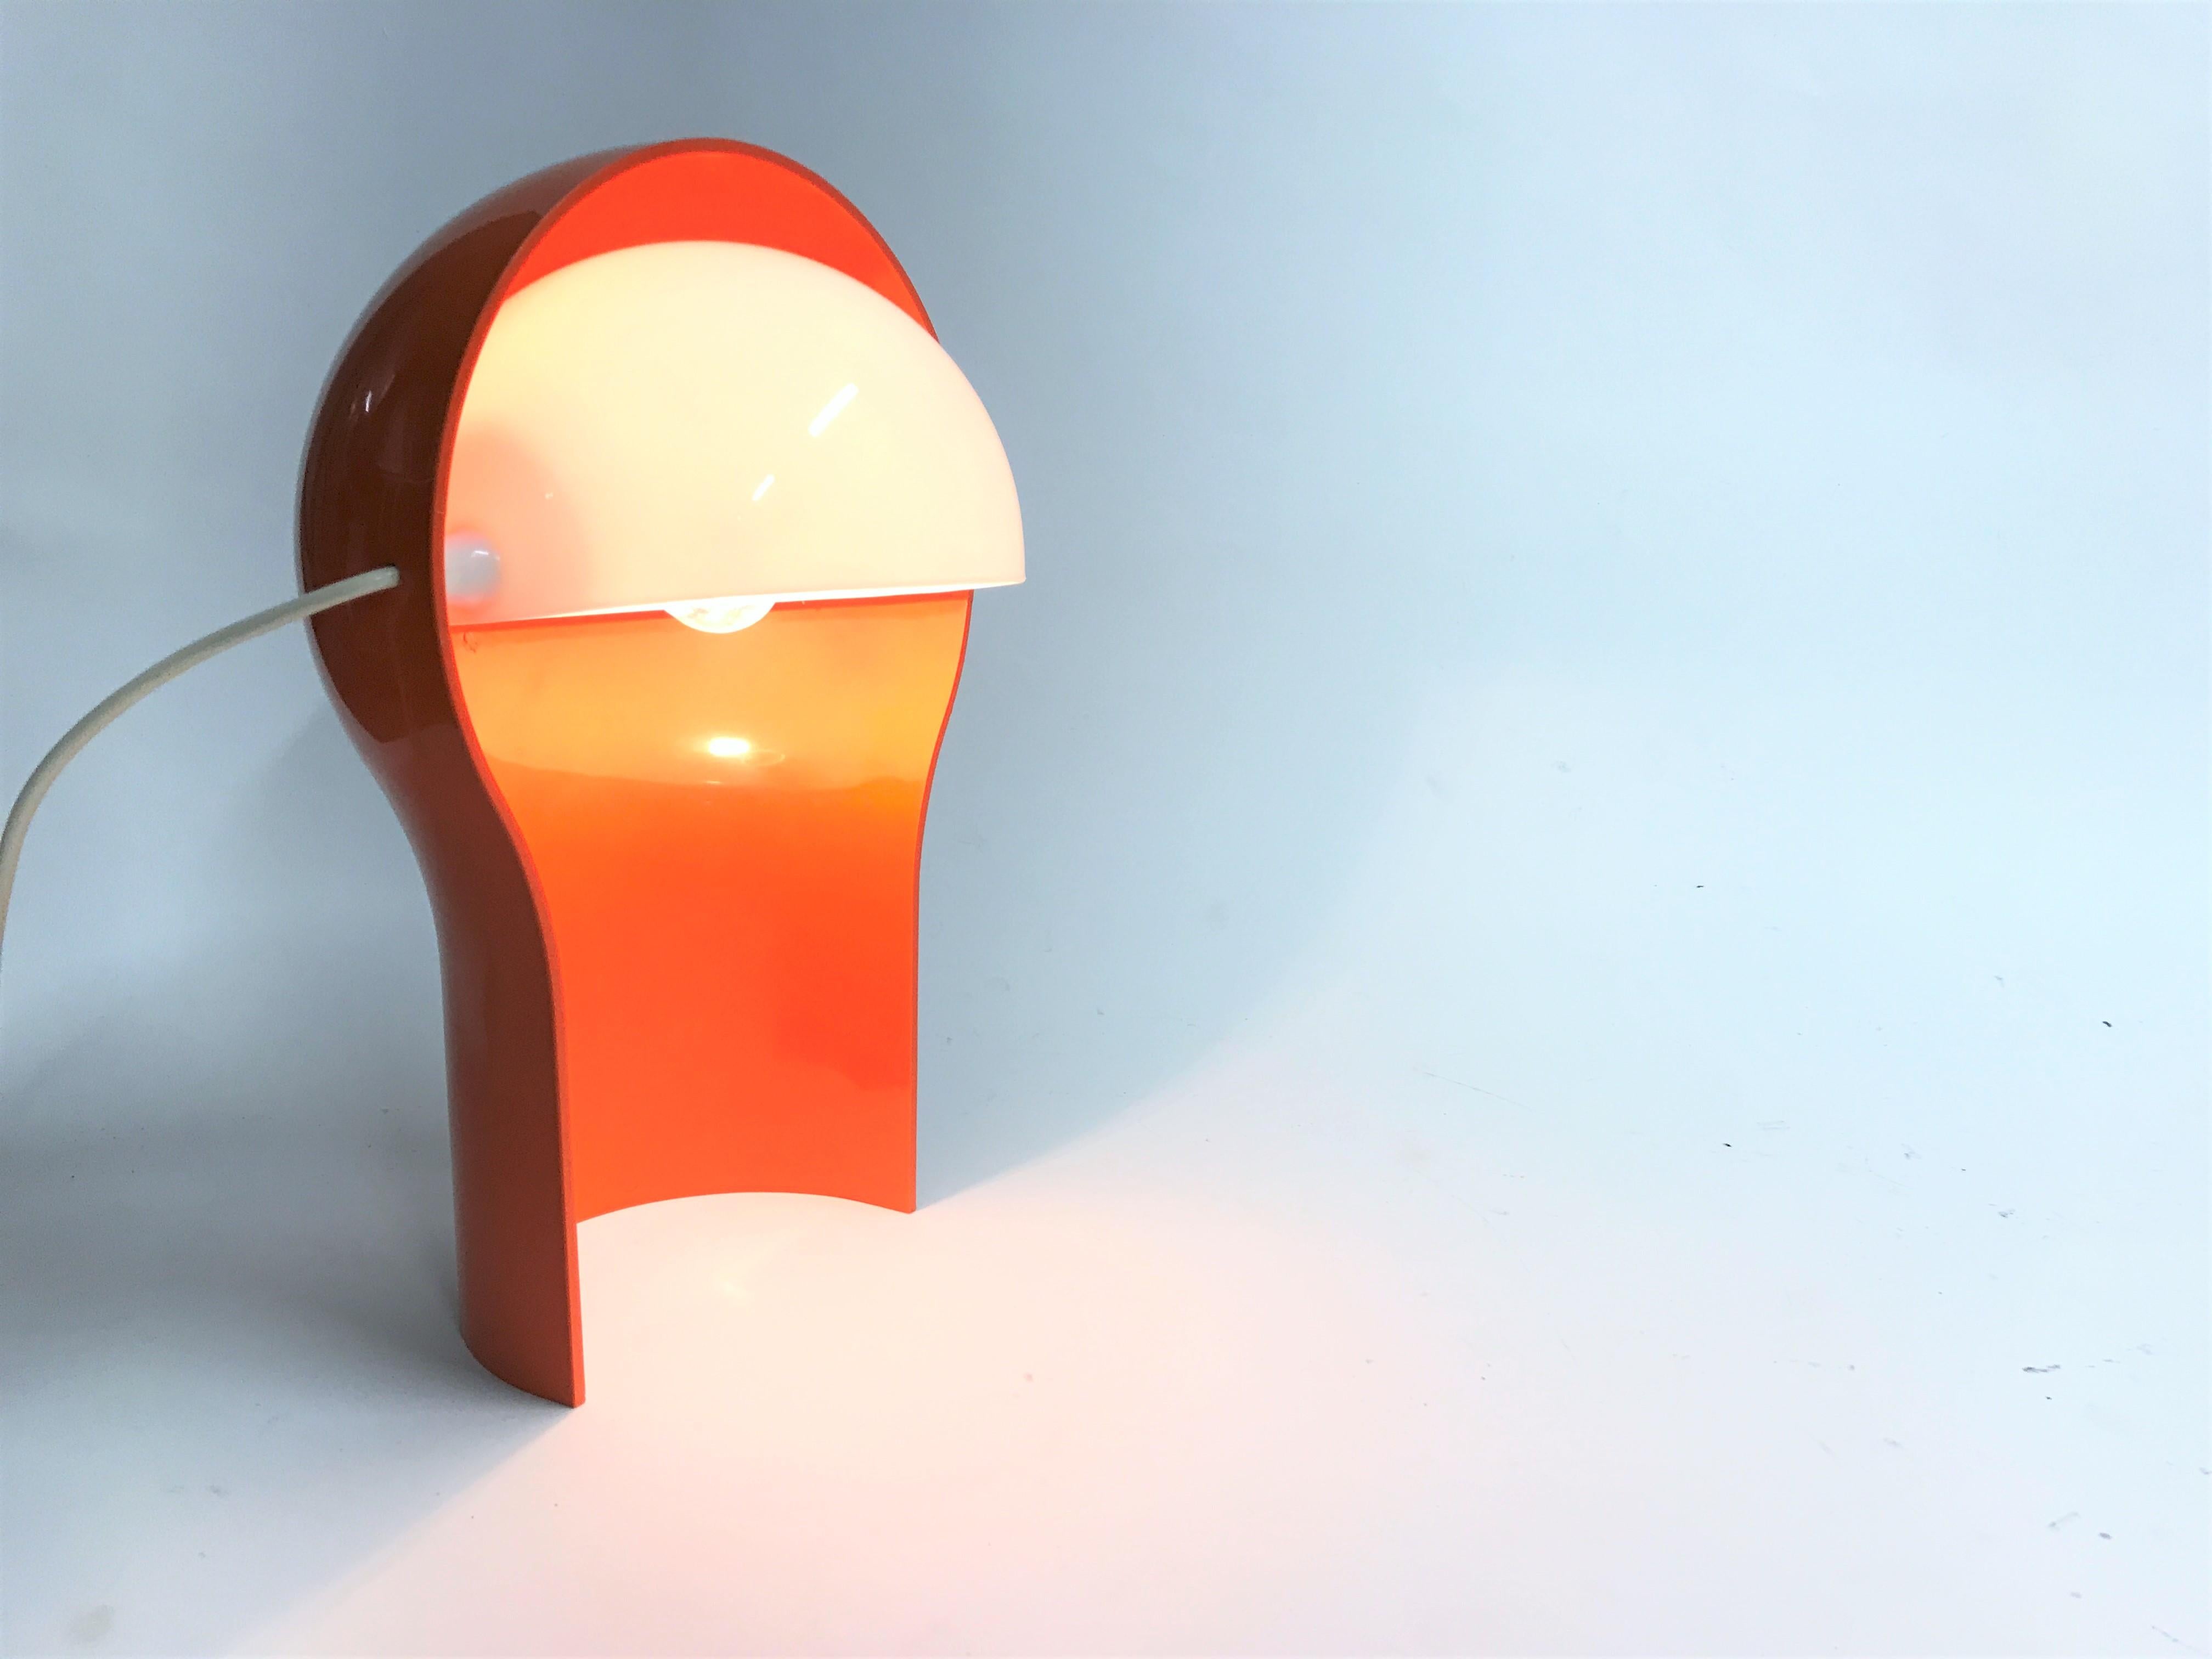 This model Telegono table lamp was designed by Vico Magistretti and produced by Artemide in 1968, Italy.

It is made from orange and white plastic.

The shade is adjustable, which makes the design really stand out.

Tested and ready to use